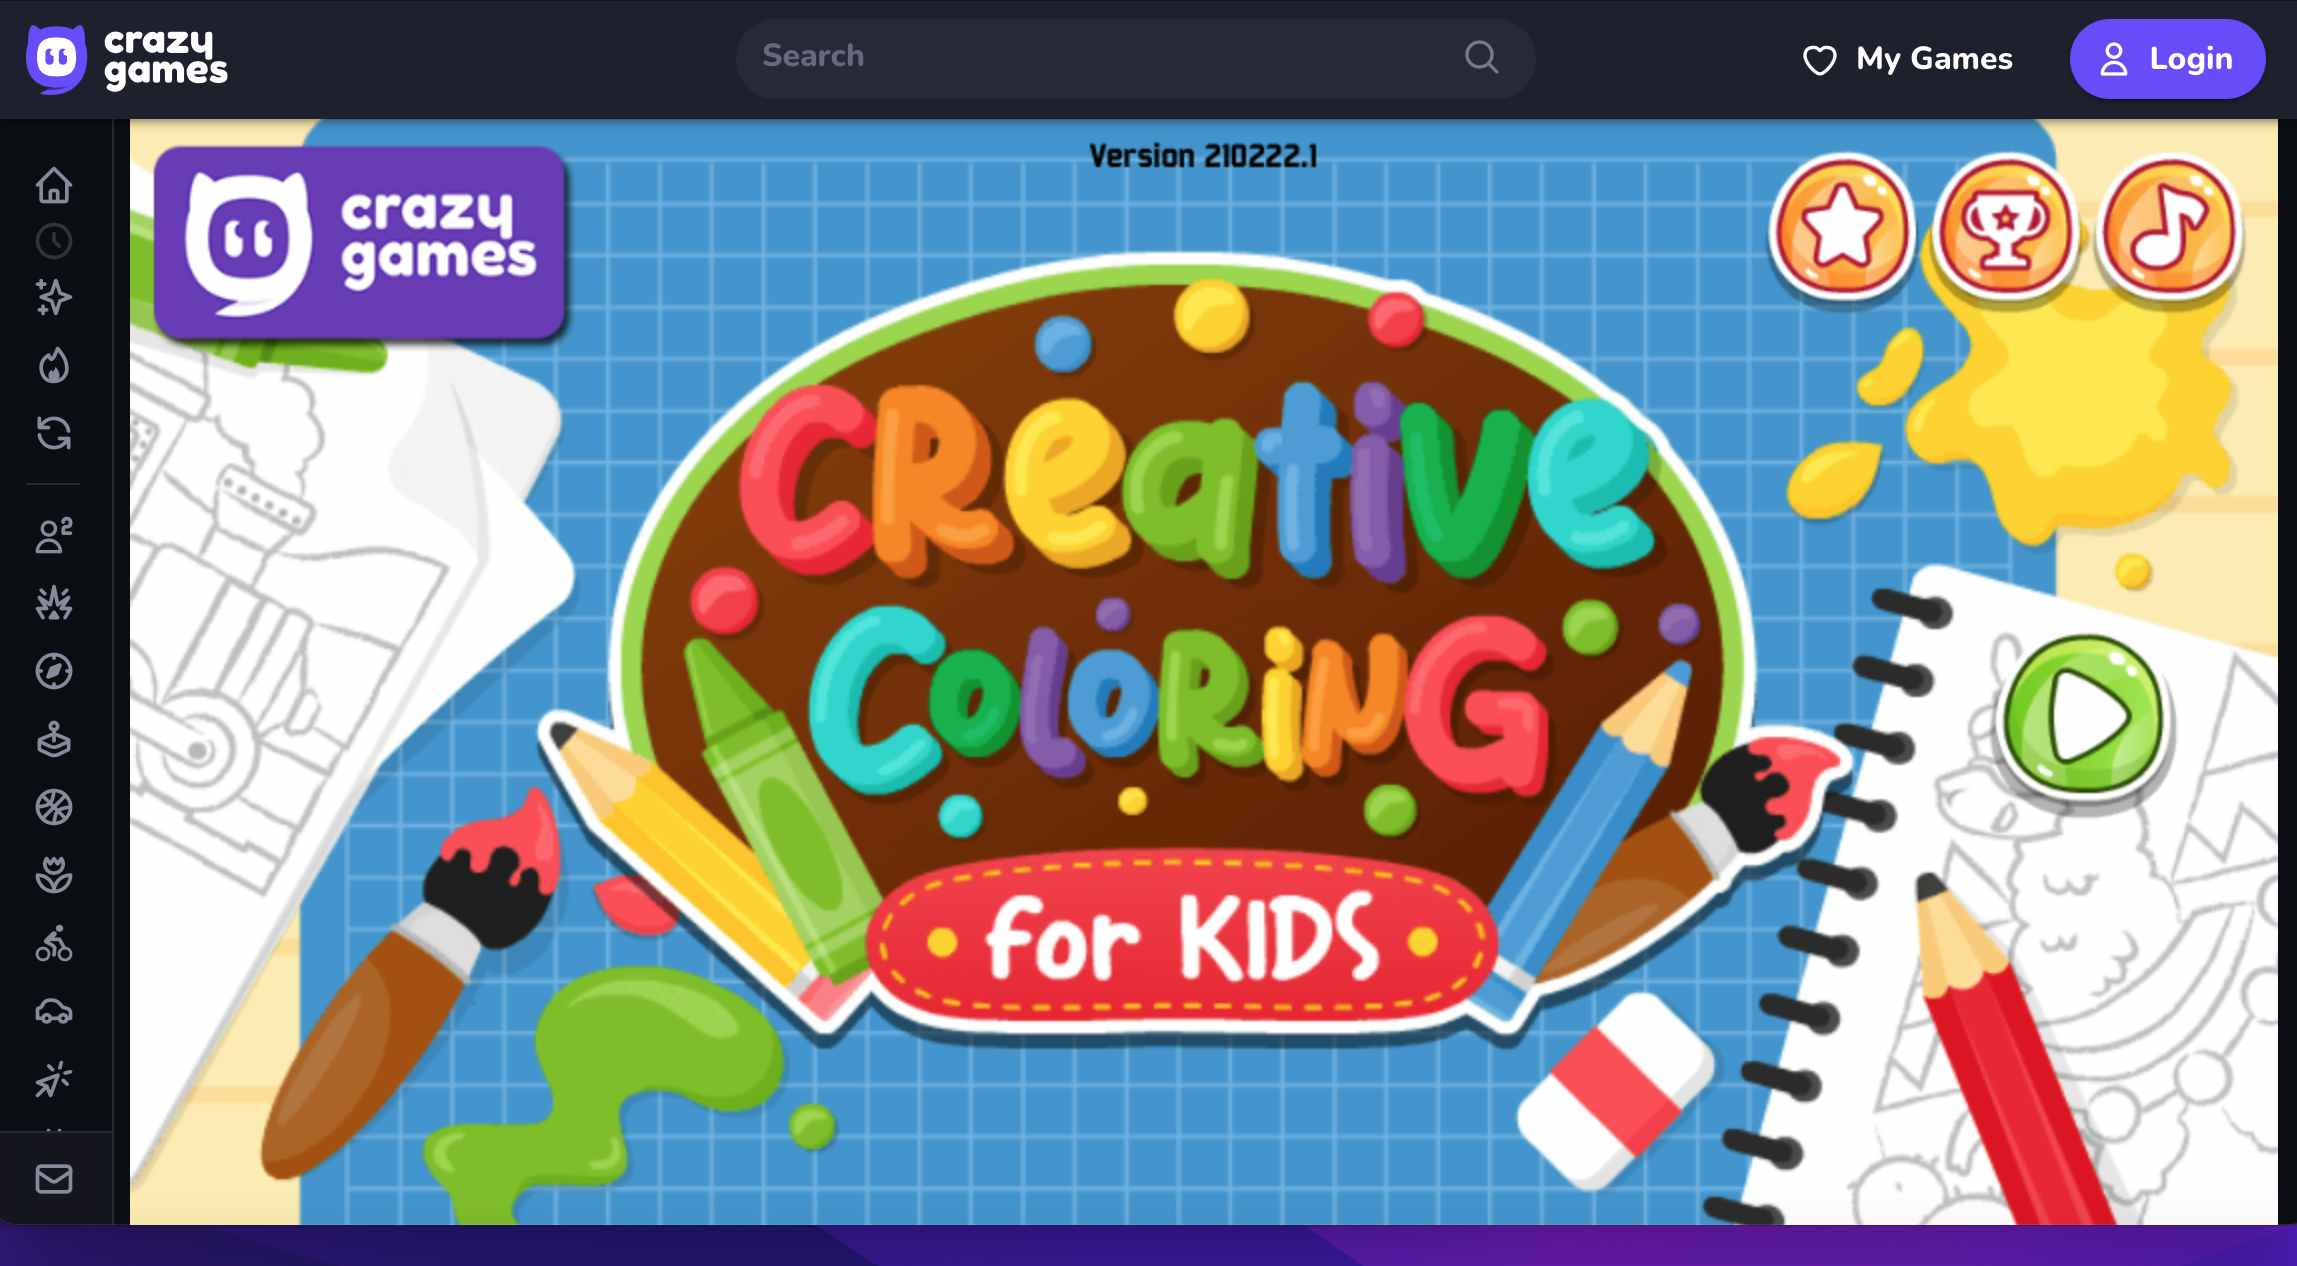 A screenshot of the Crazy Games creative coloring art games for kids webpage.